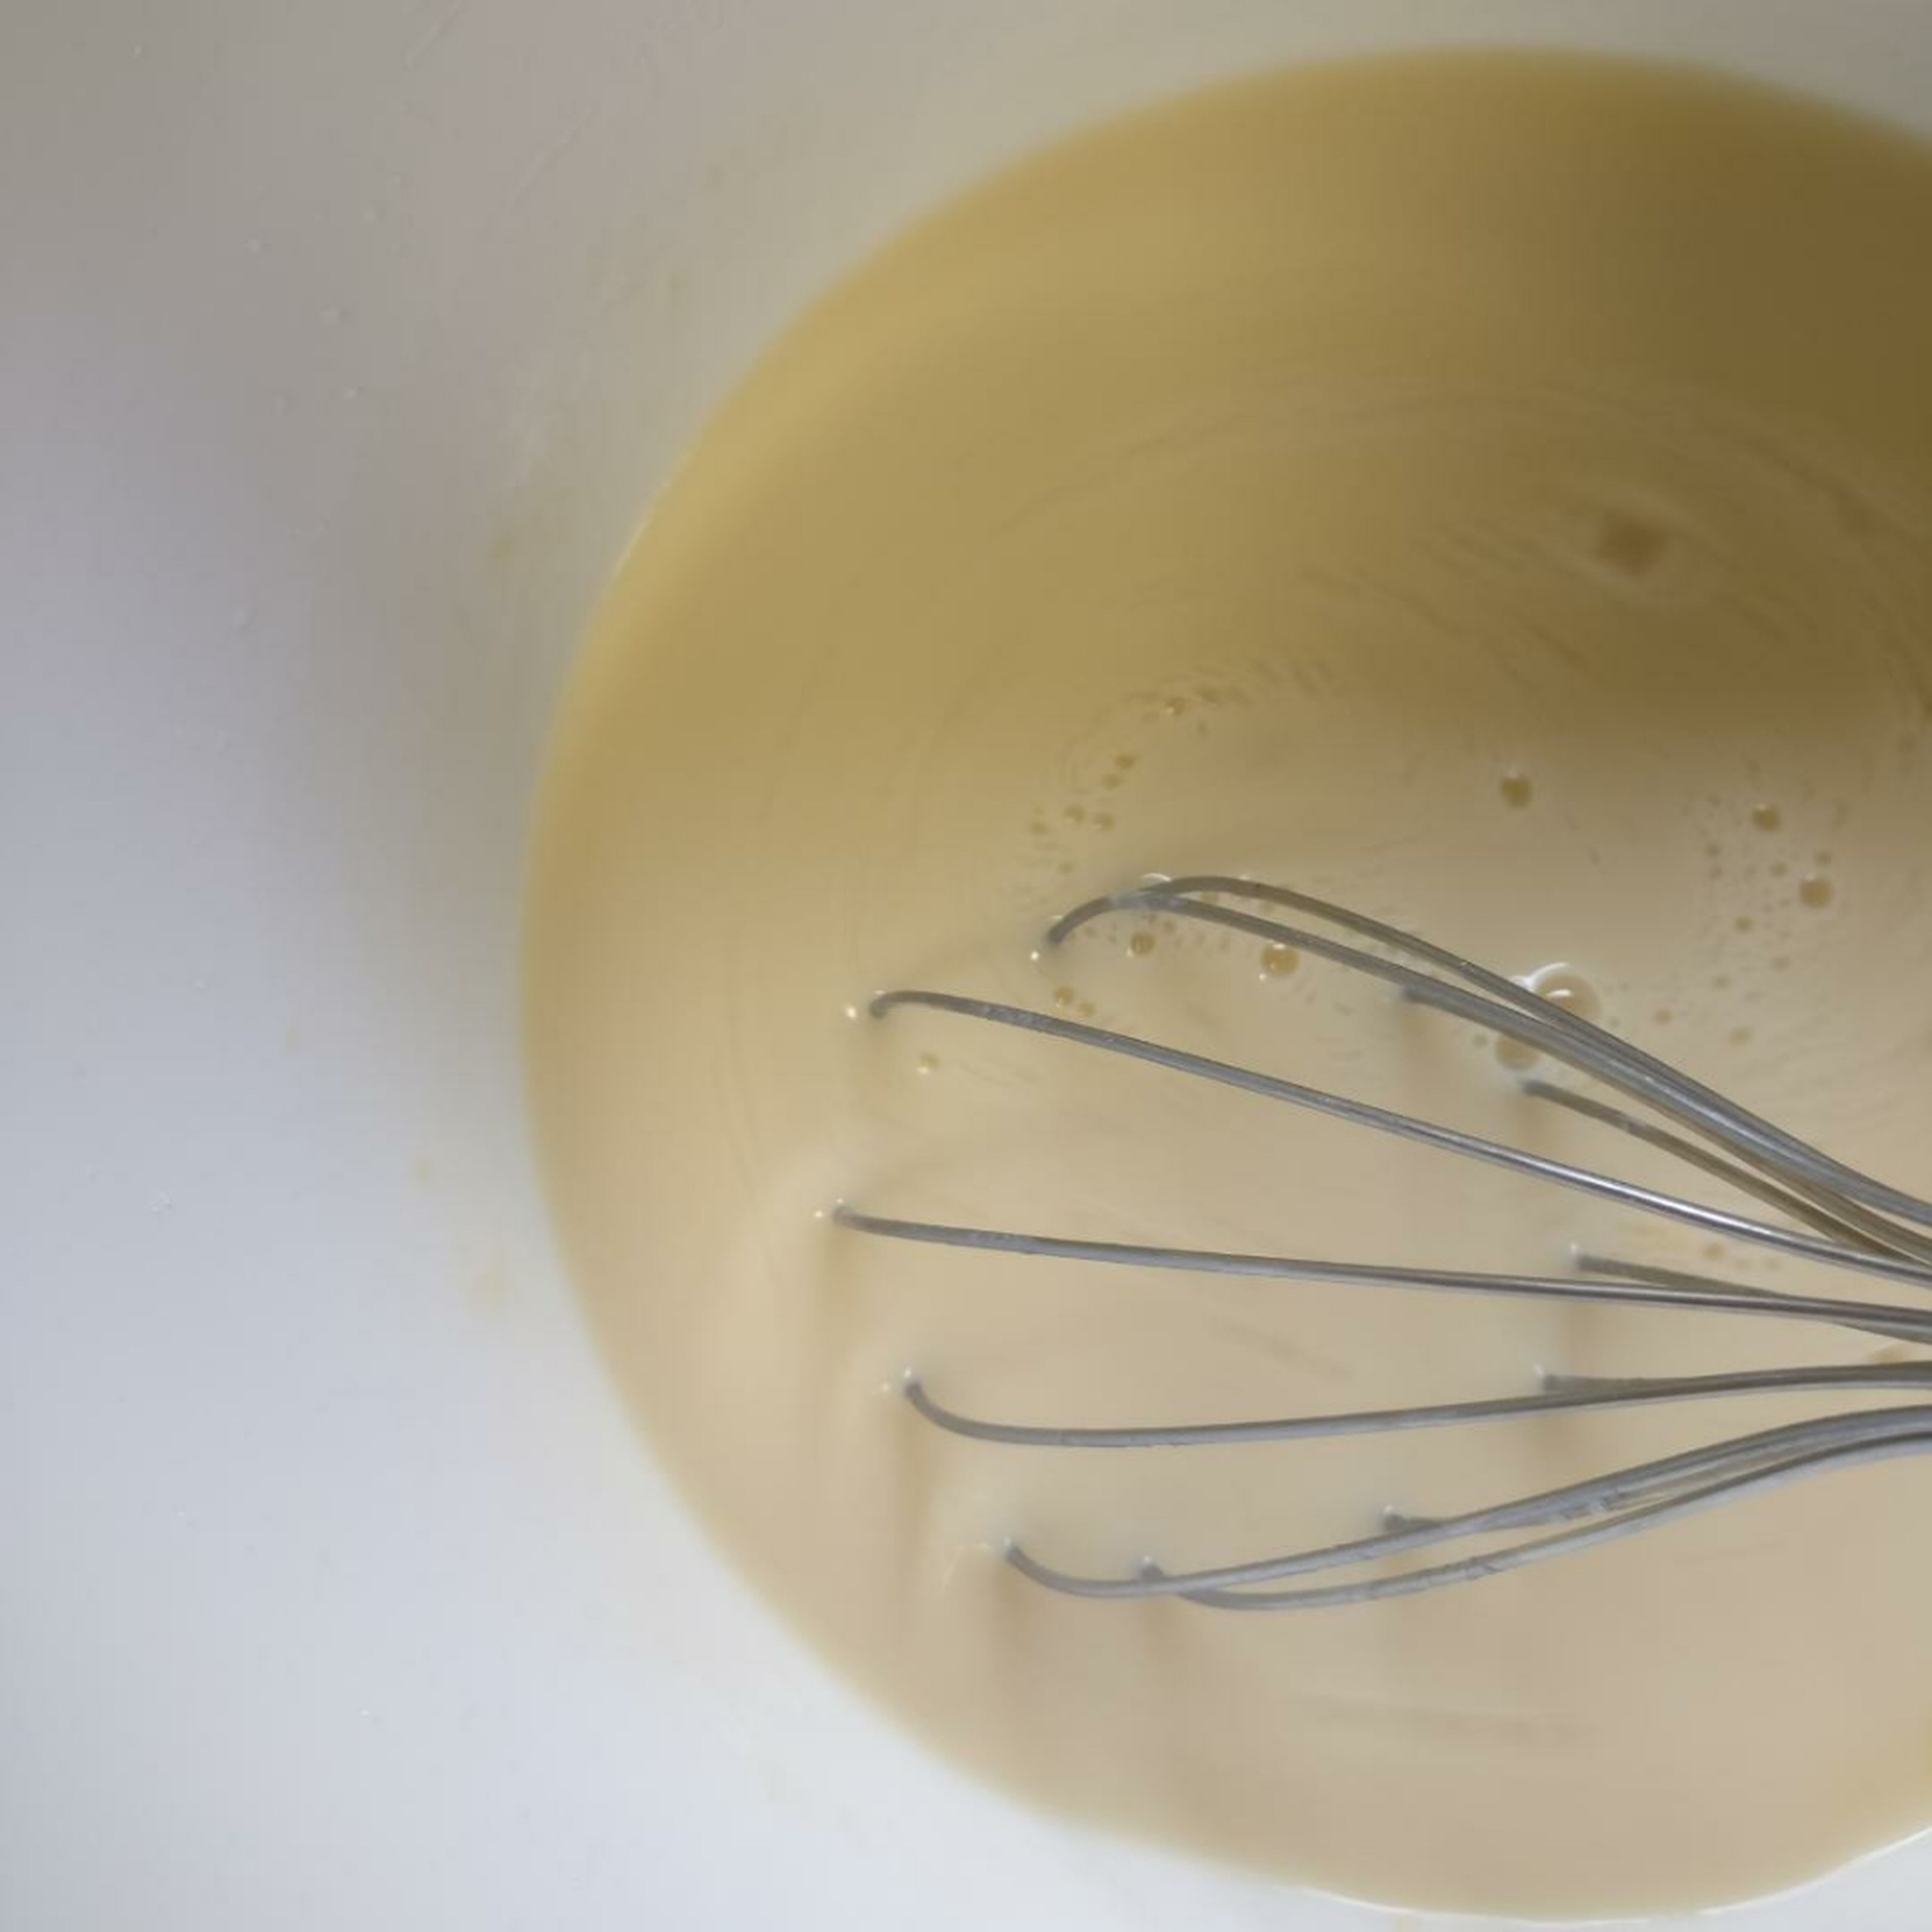 Mix Eggs, Sugar, Milk and Vanilla Extract in a bowl till it becomes like a pancake mixture.